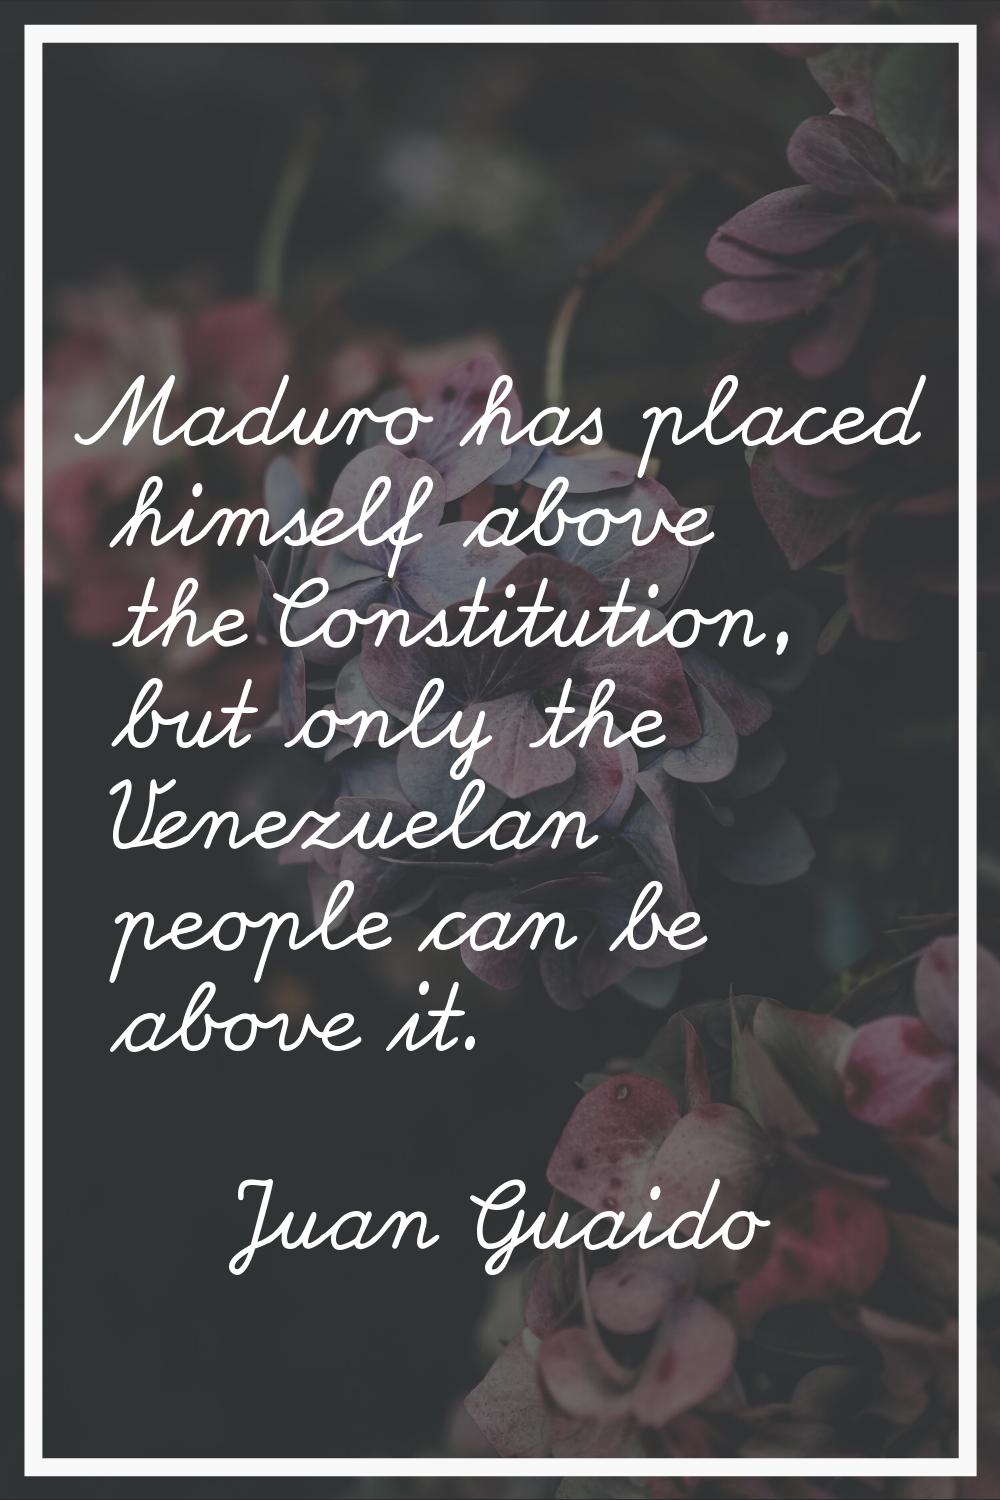 Maduro has placed himself above the Constitution, but only the Venezuelan people can be above it.